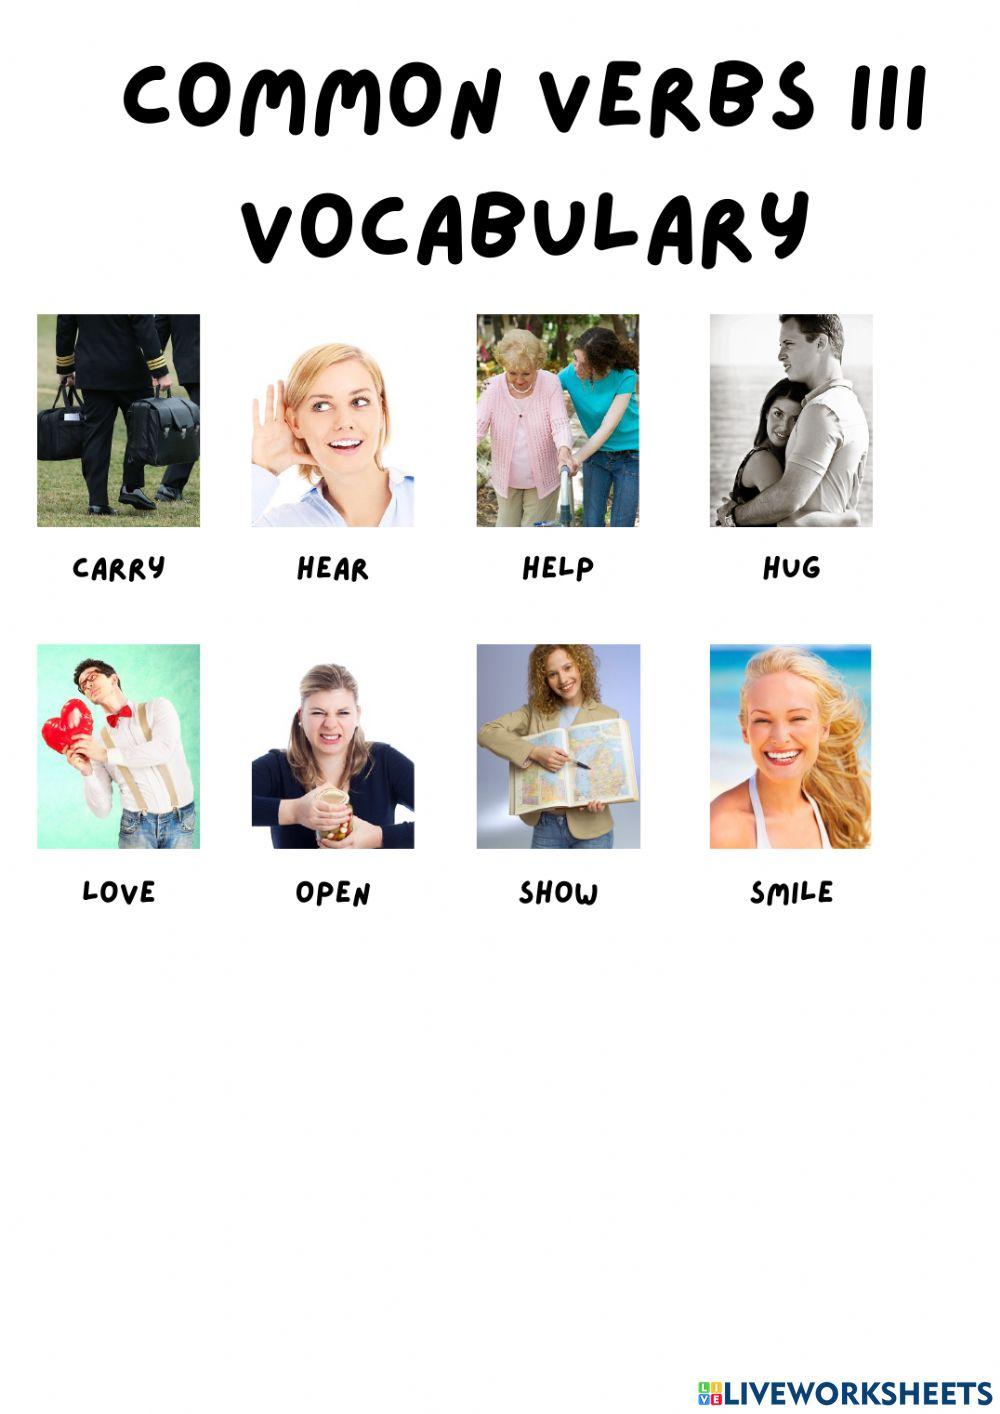 Common verbs III vocabulary picture dictionary